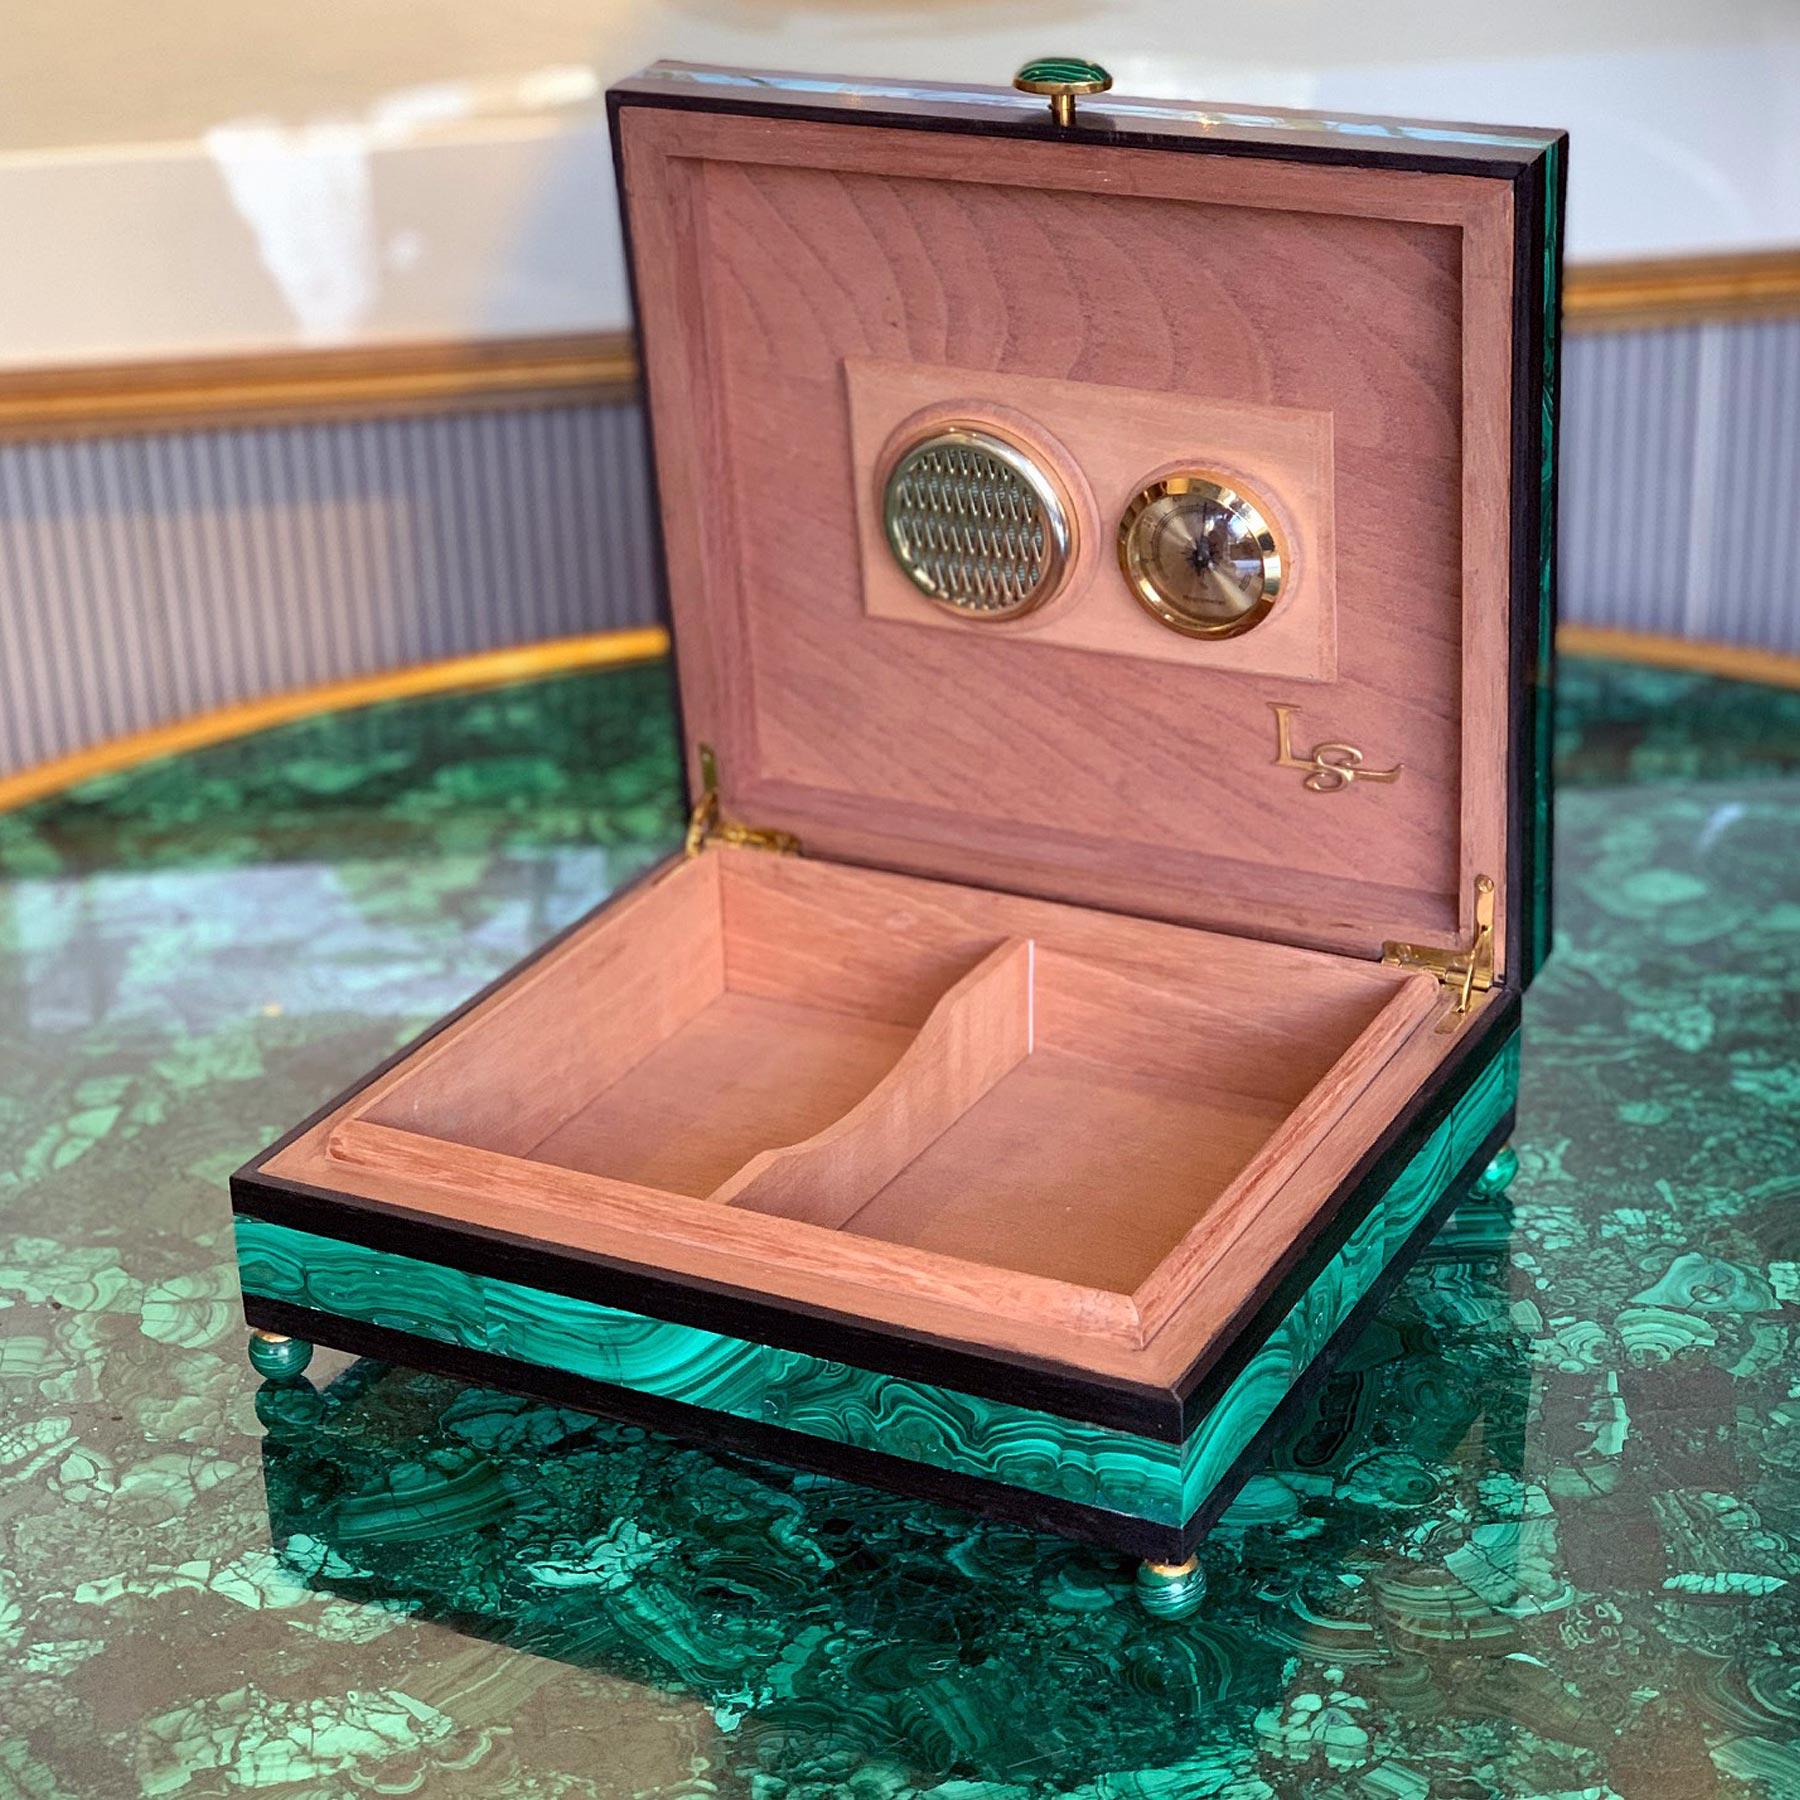 An ebony humidor lined with Spanish Cedar, inlaid with malachite banding on the sides and a map of Russia on the top with Diamonds showing the location of Moscow and St Petersburg and a gilt bronze Russian Brown Bear mounted on the top of the